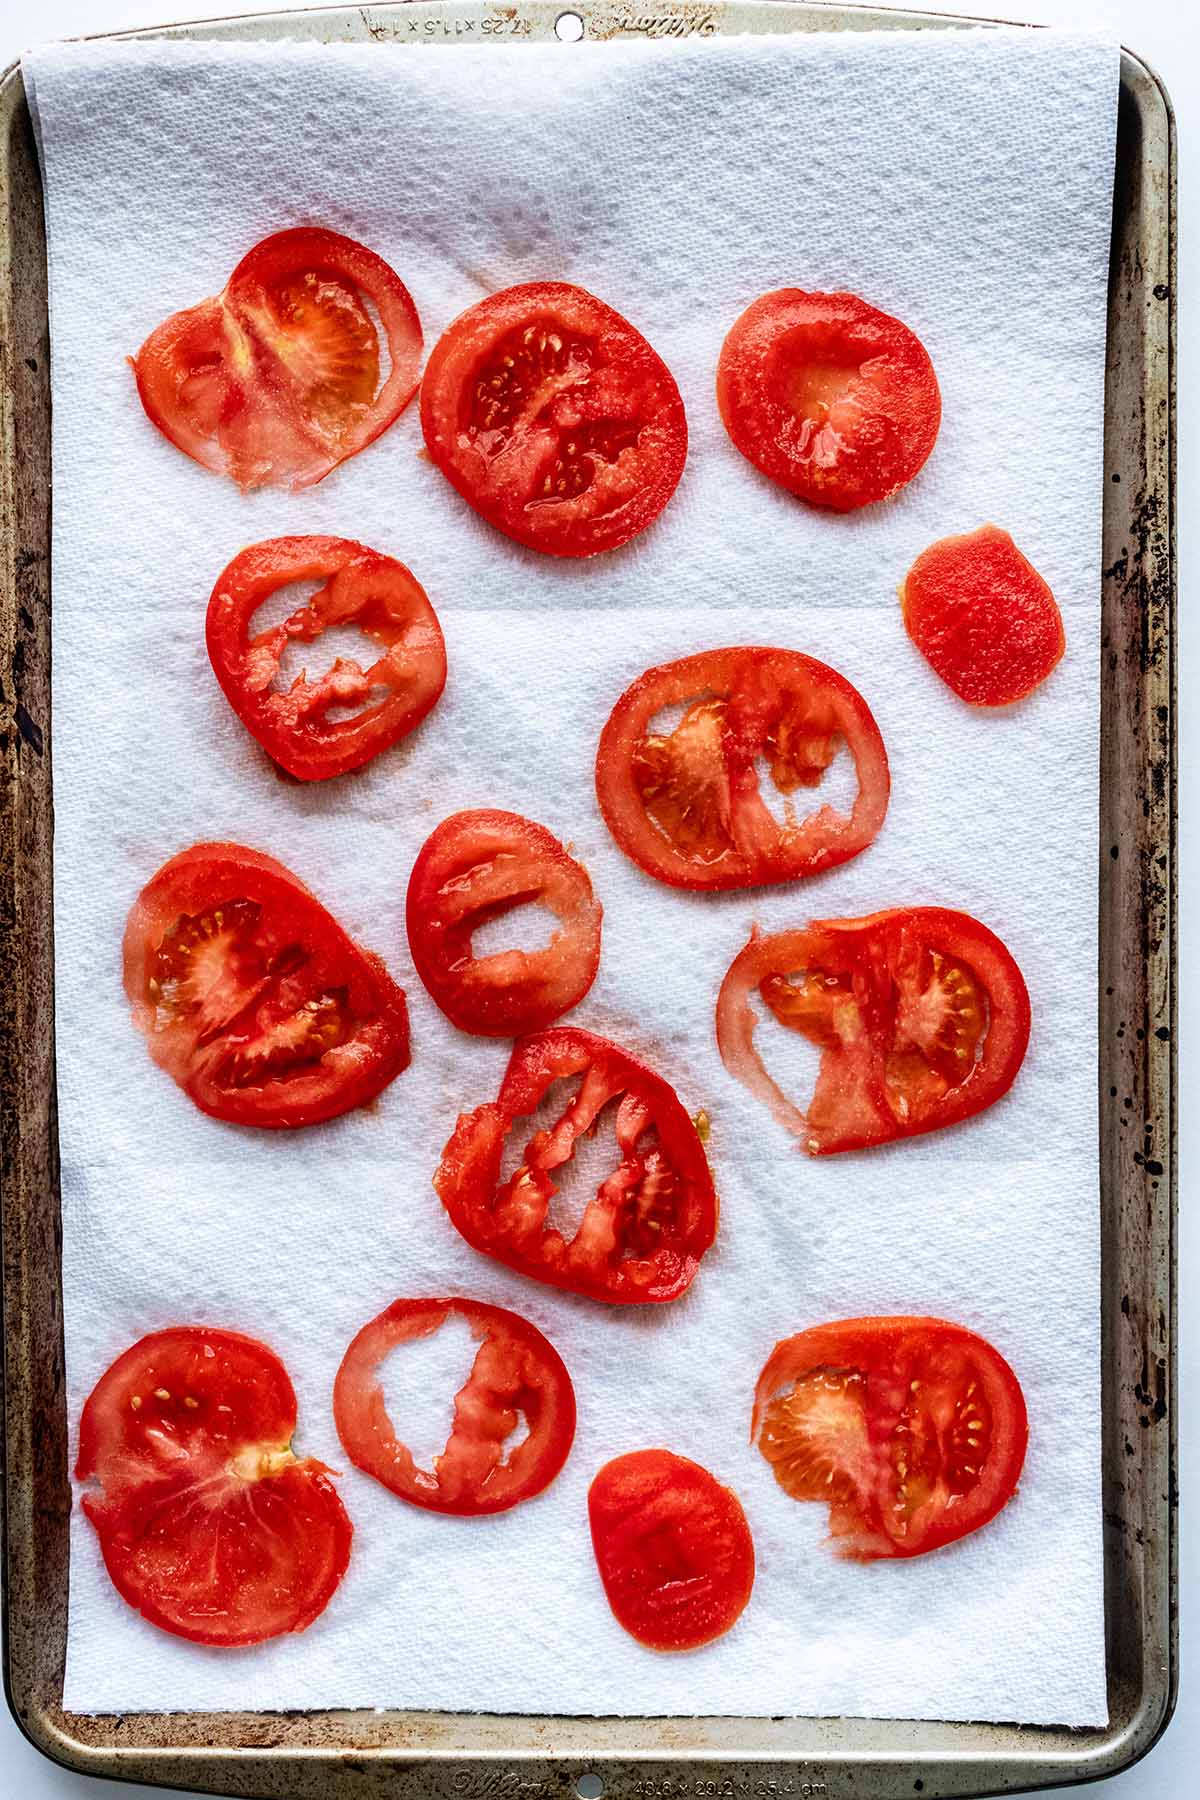 Sliced tomato on a paper towel in a baking sheet.